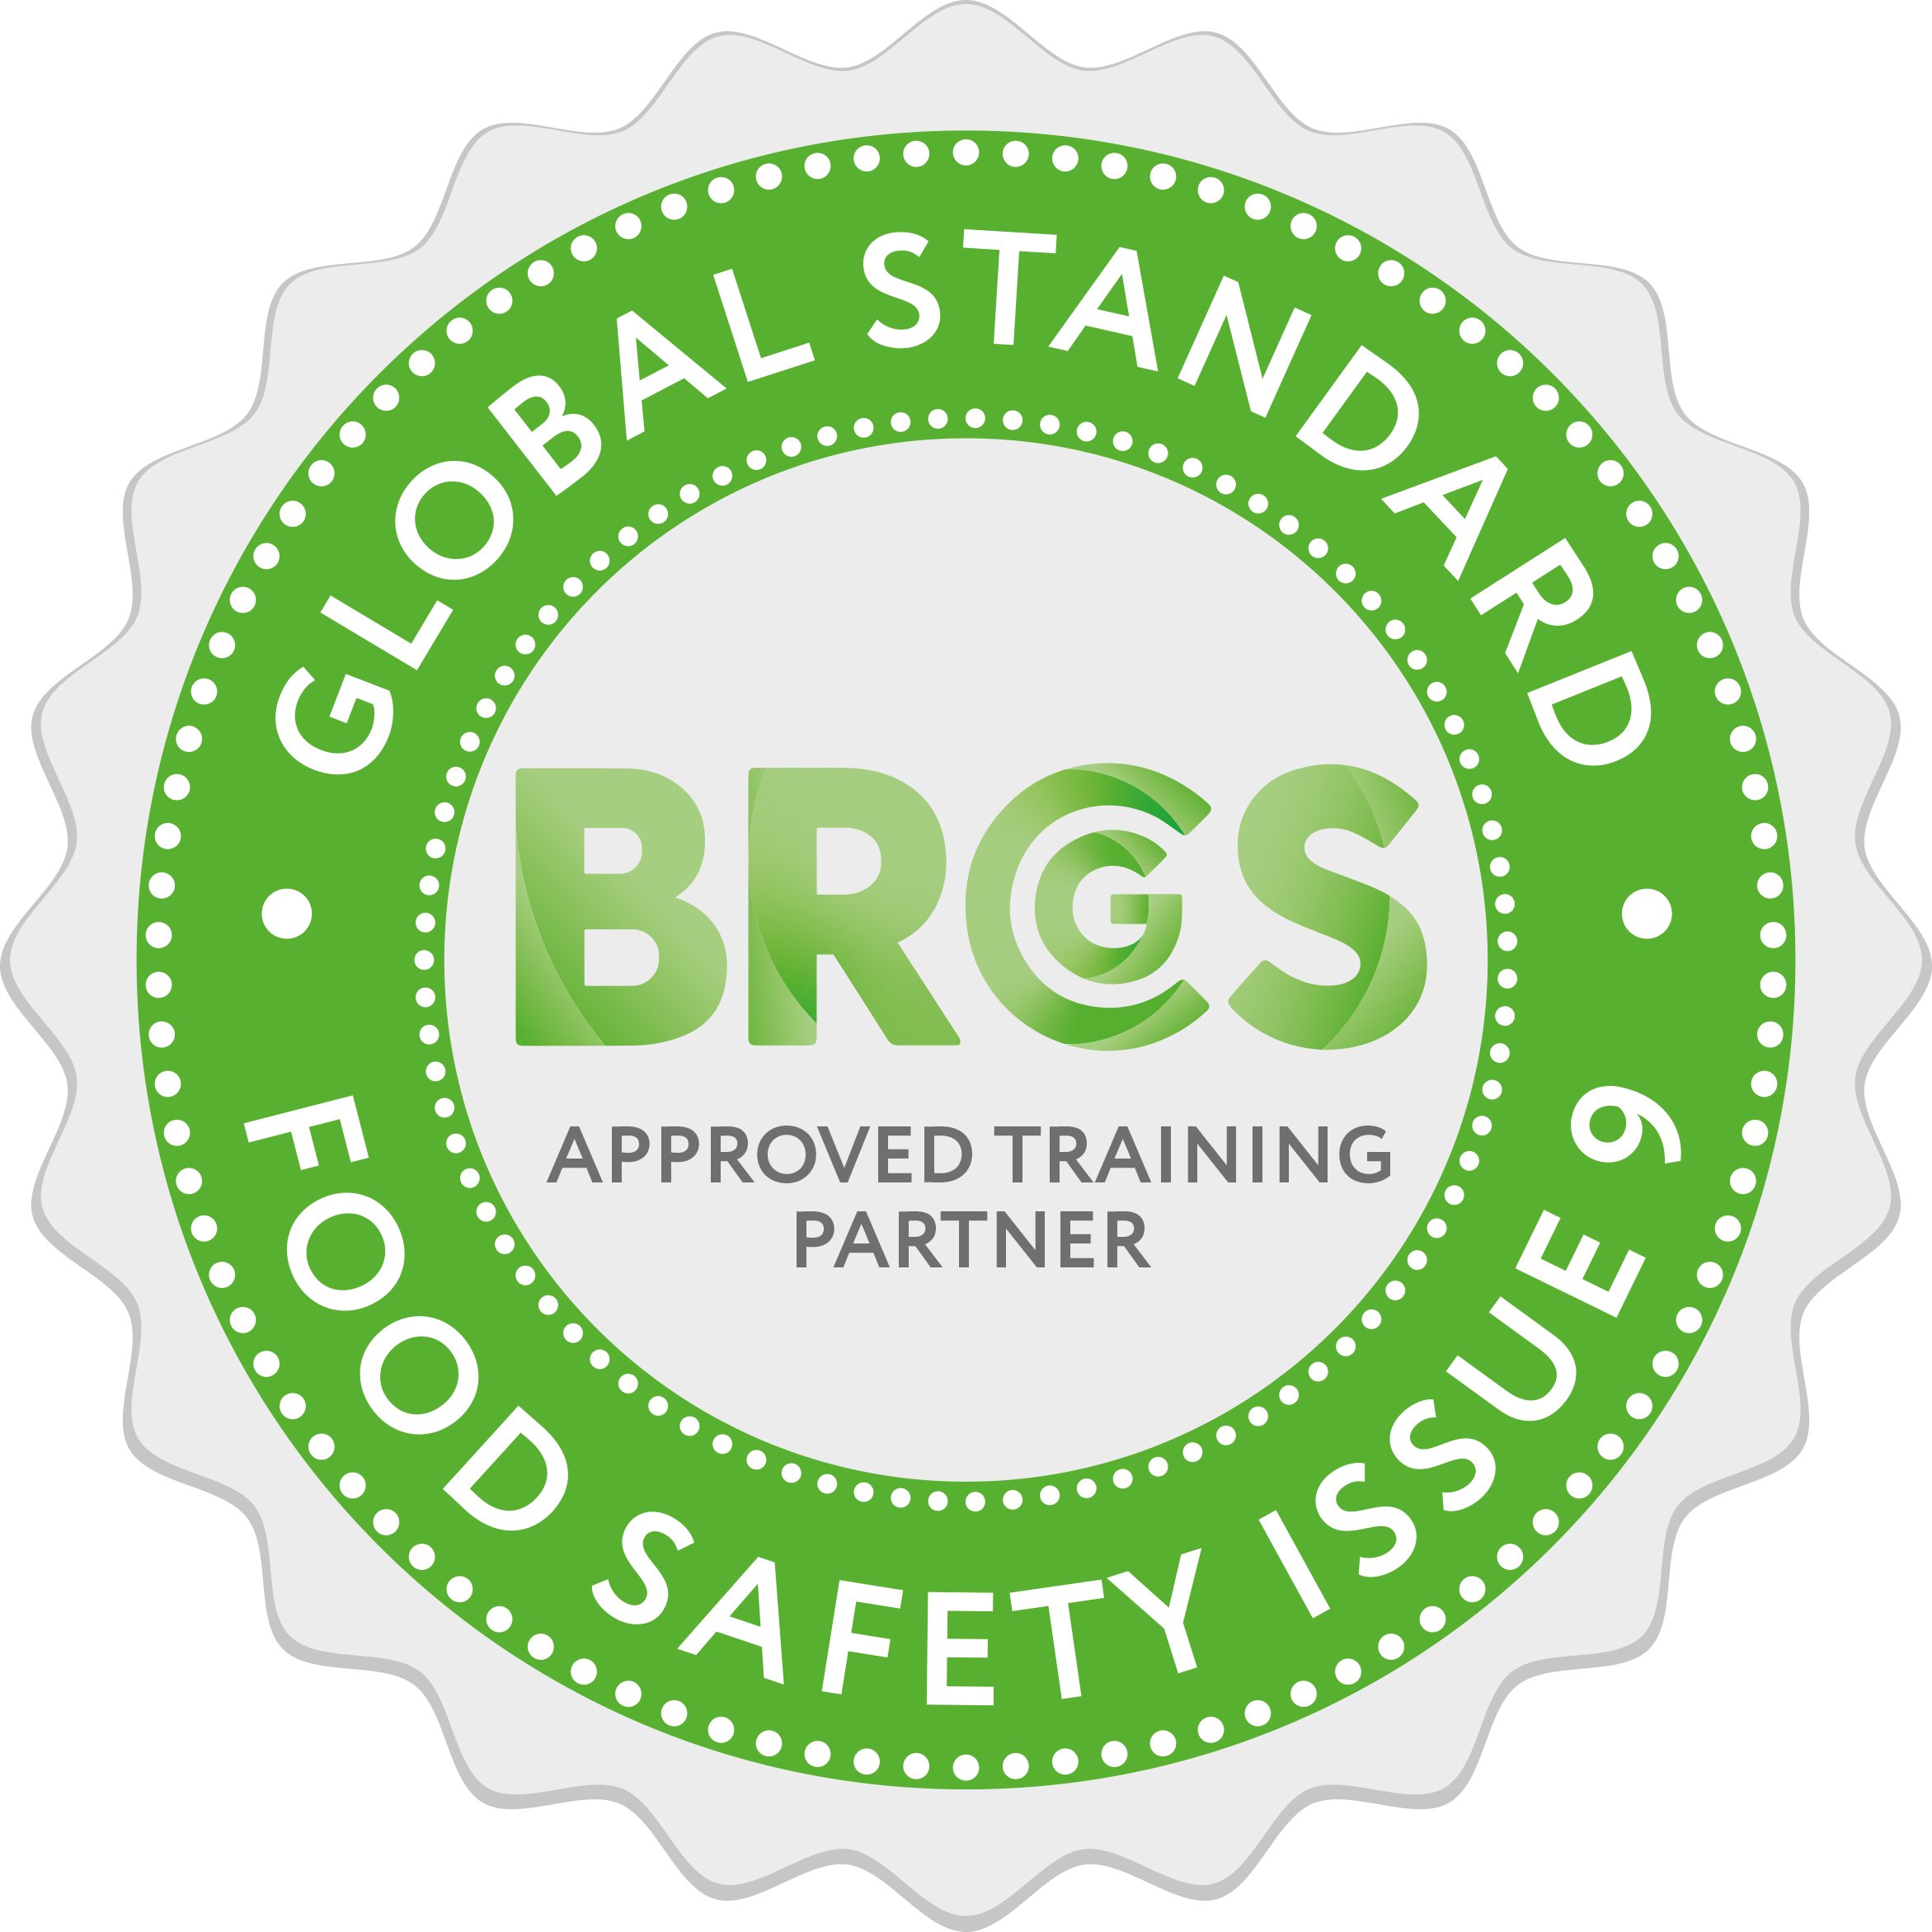 BRCGS Food Safety v9 courses